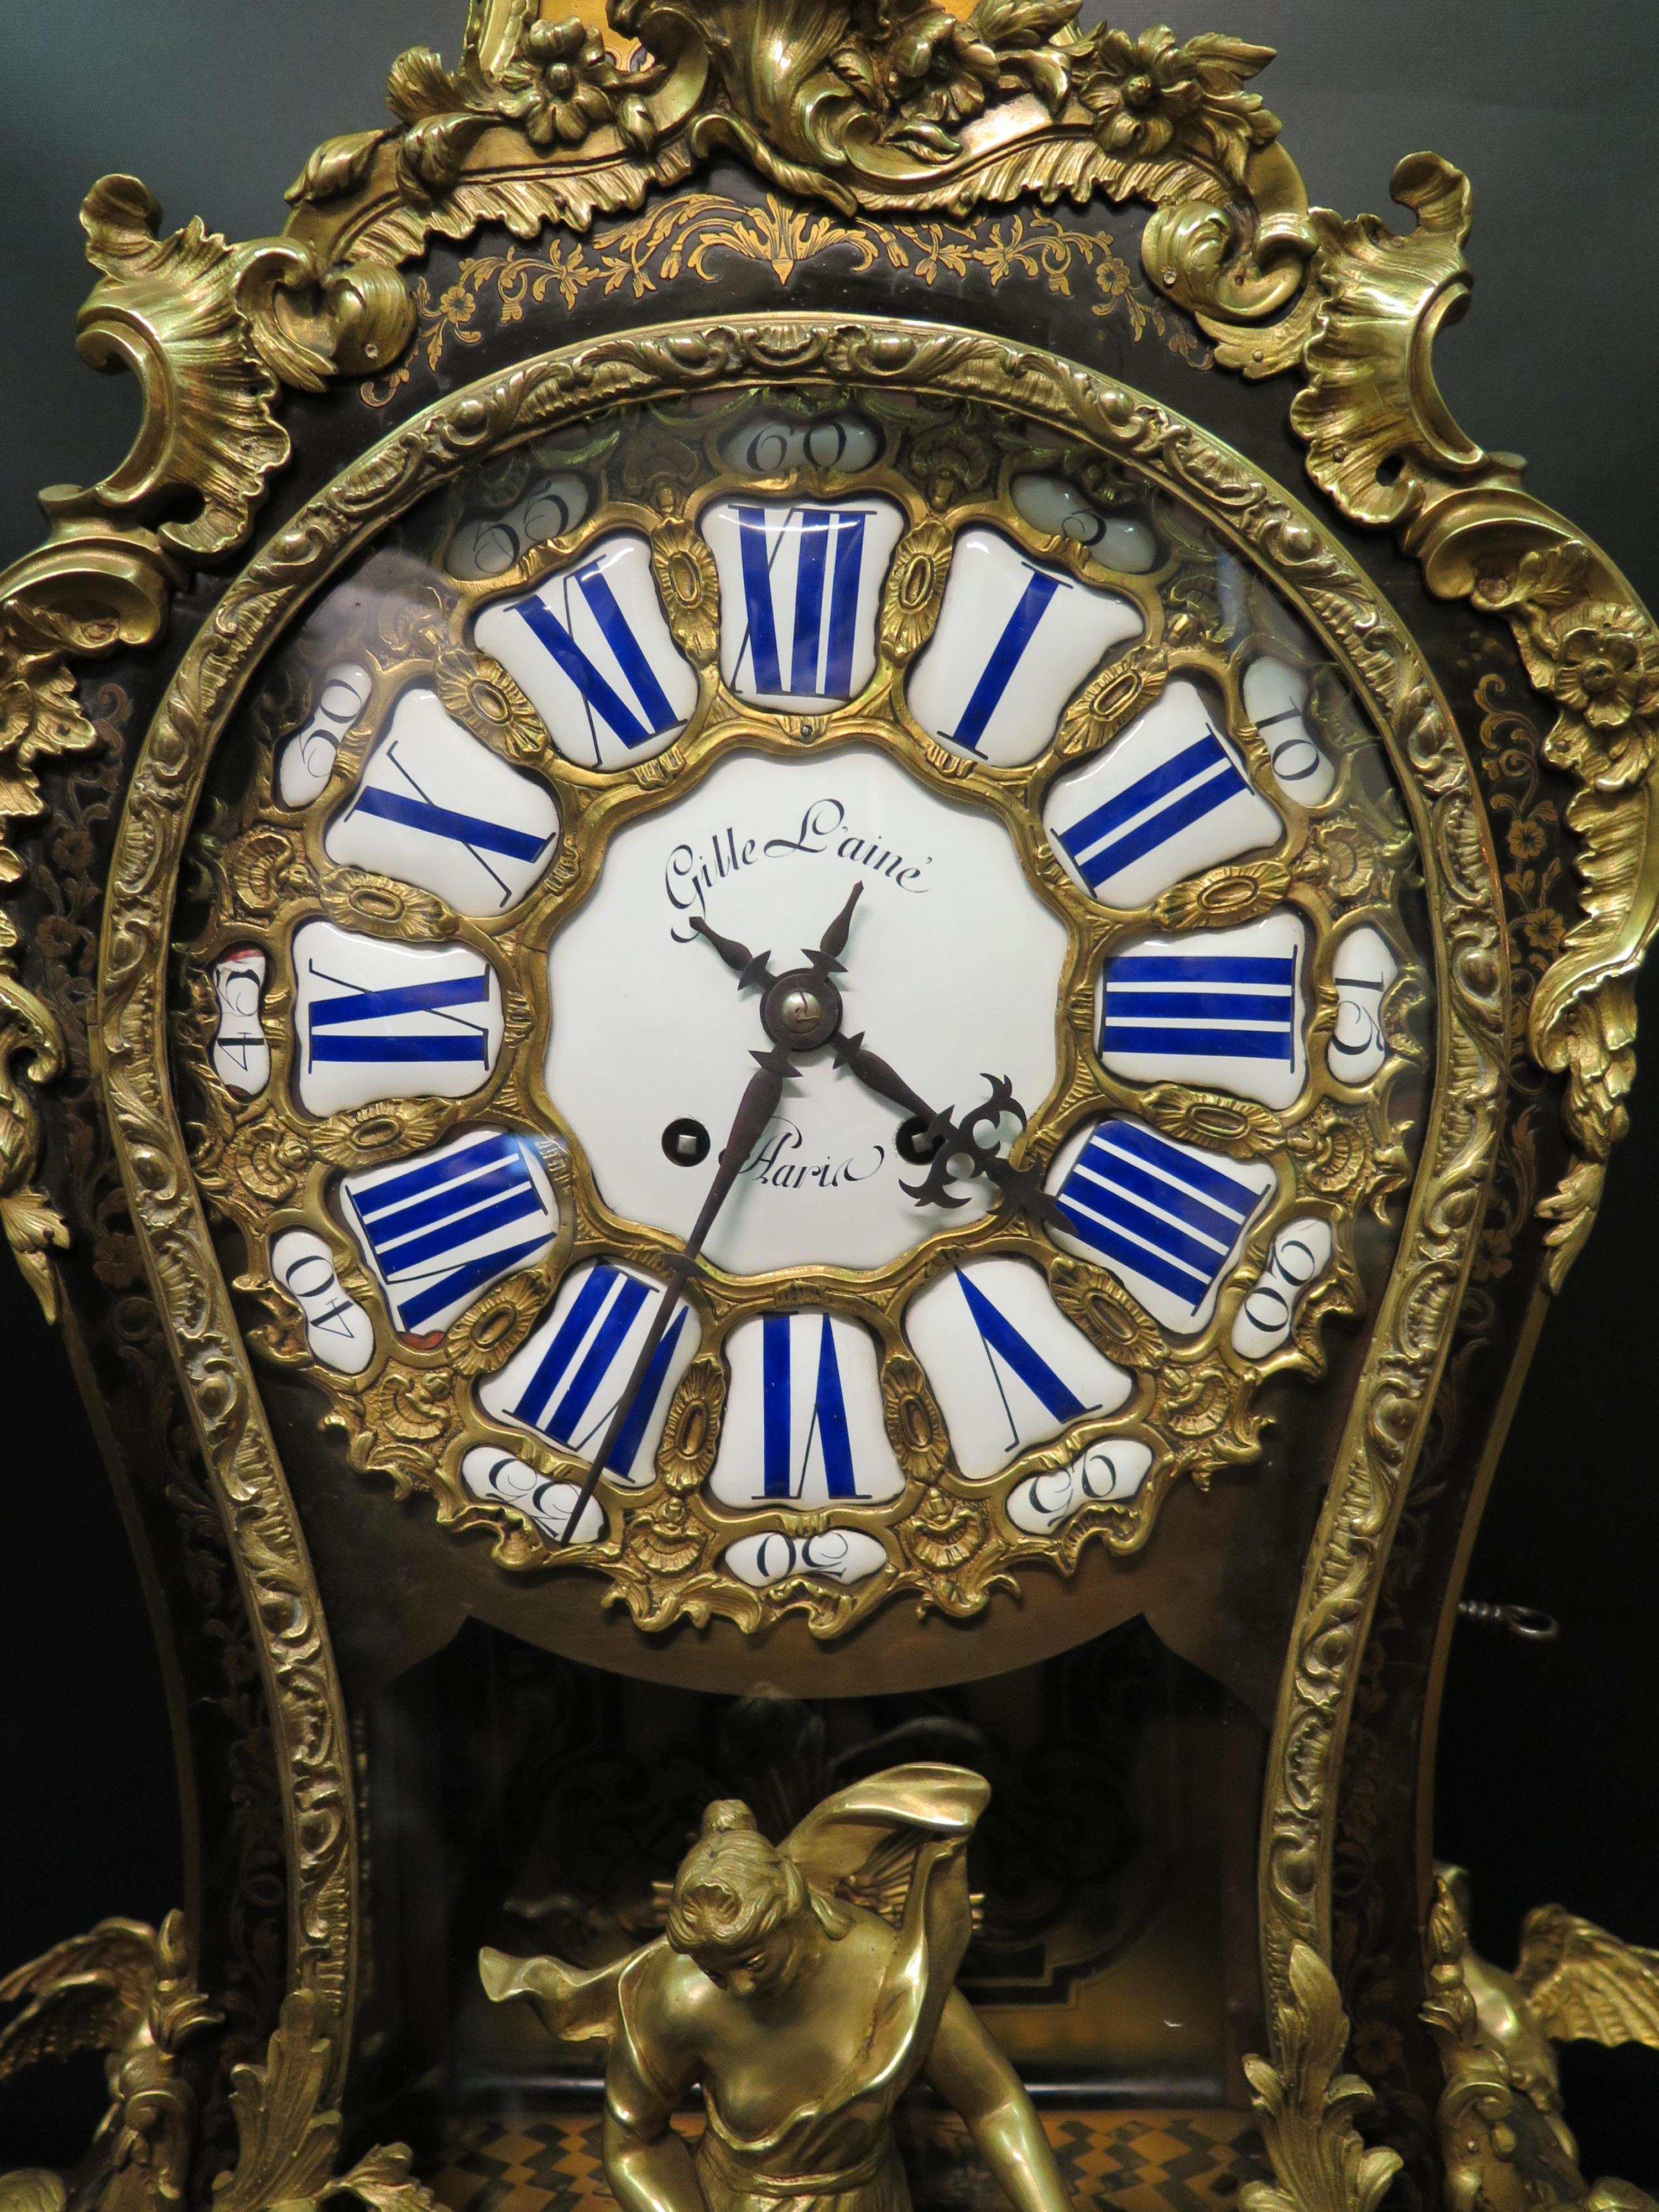 This vintage early 1900s French oversize Boulle clock is beautifully designed with a decorative bronze & inlaid case. This inlaid Boulle work is a floral motif that subtlety highlights the elaborate sculpted ormolu decorations. These decorations